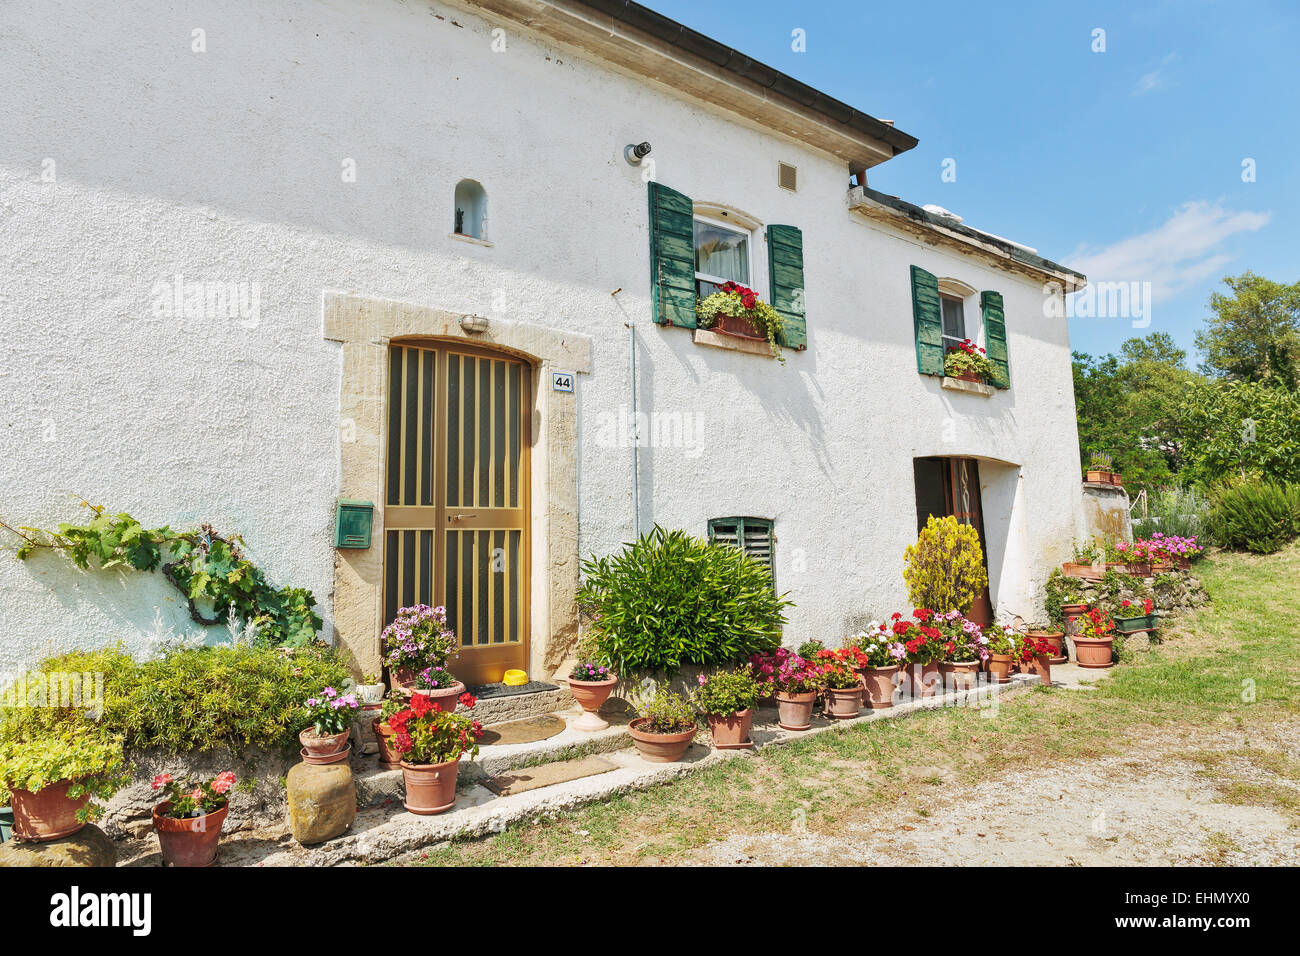 Old typical Tuscan farmhouse in Italy Stock Photo